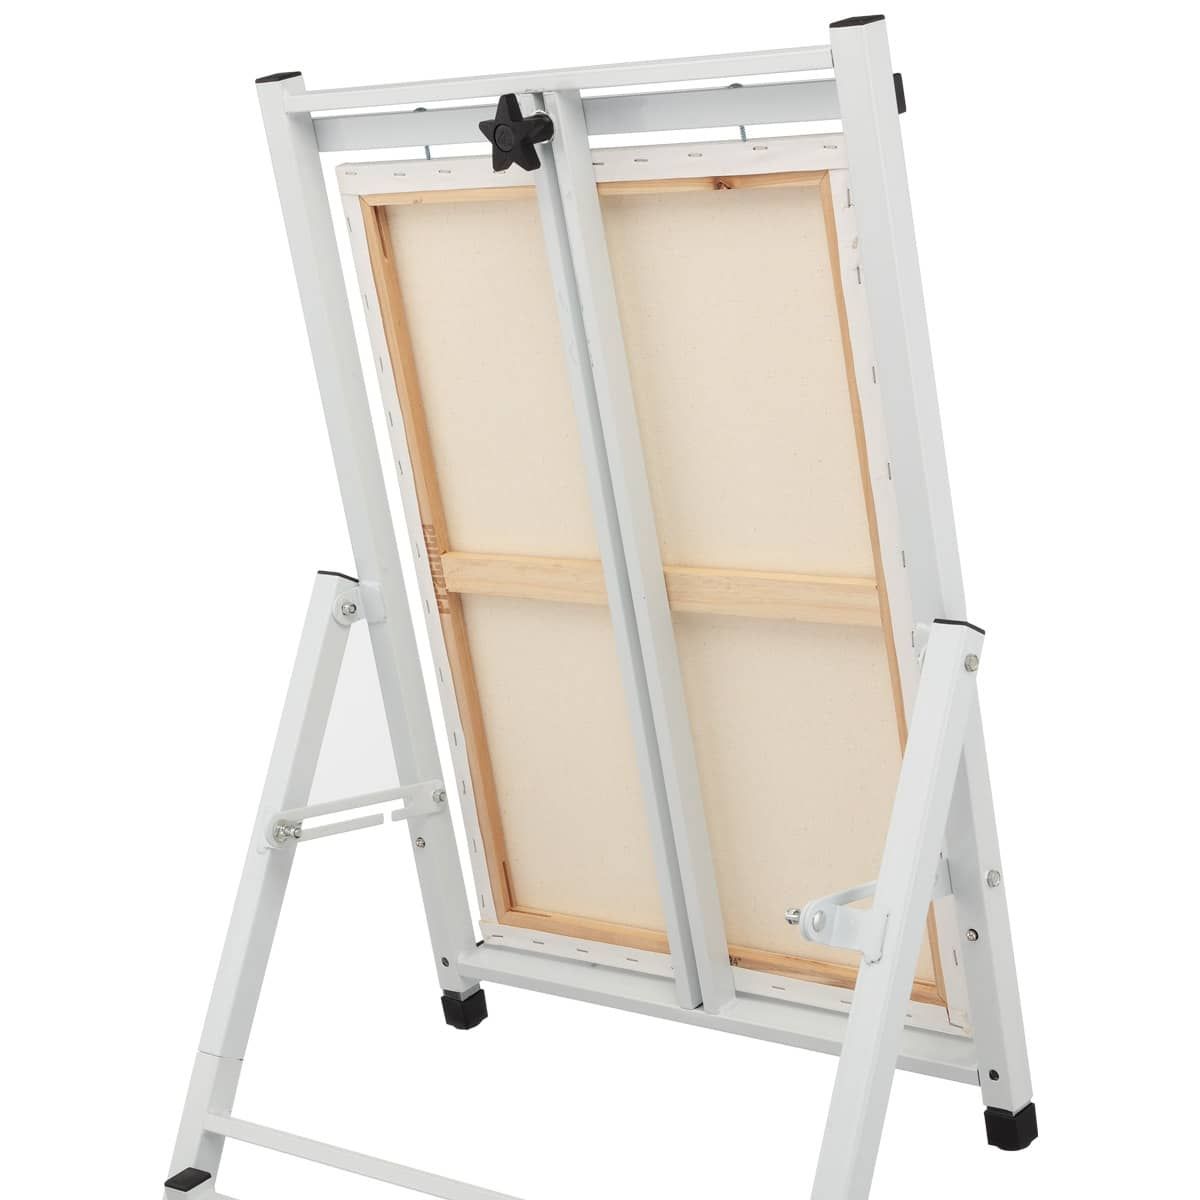 Bob Ross Easel Review - Everything You Need To Know Before You Buy! 